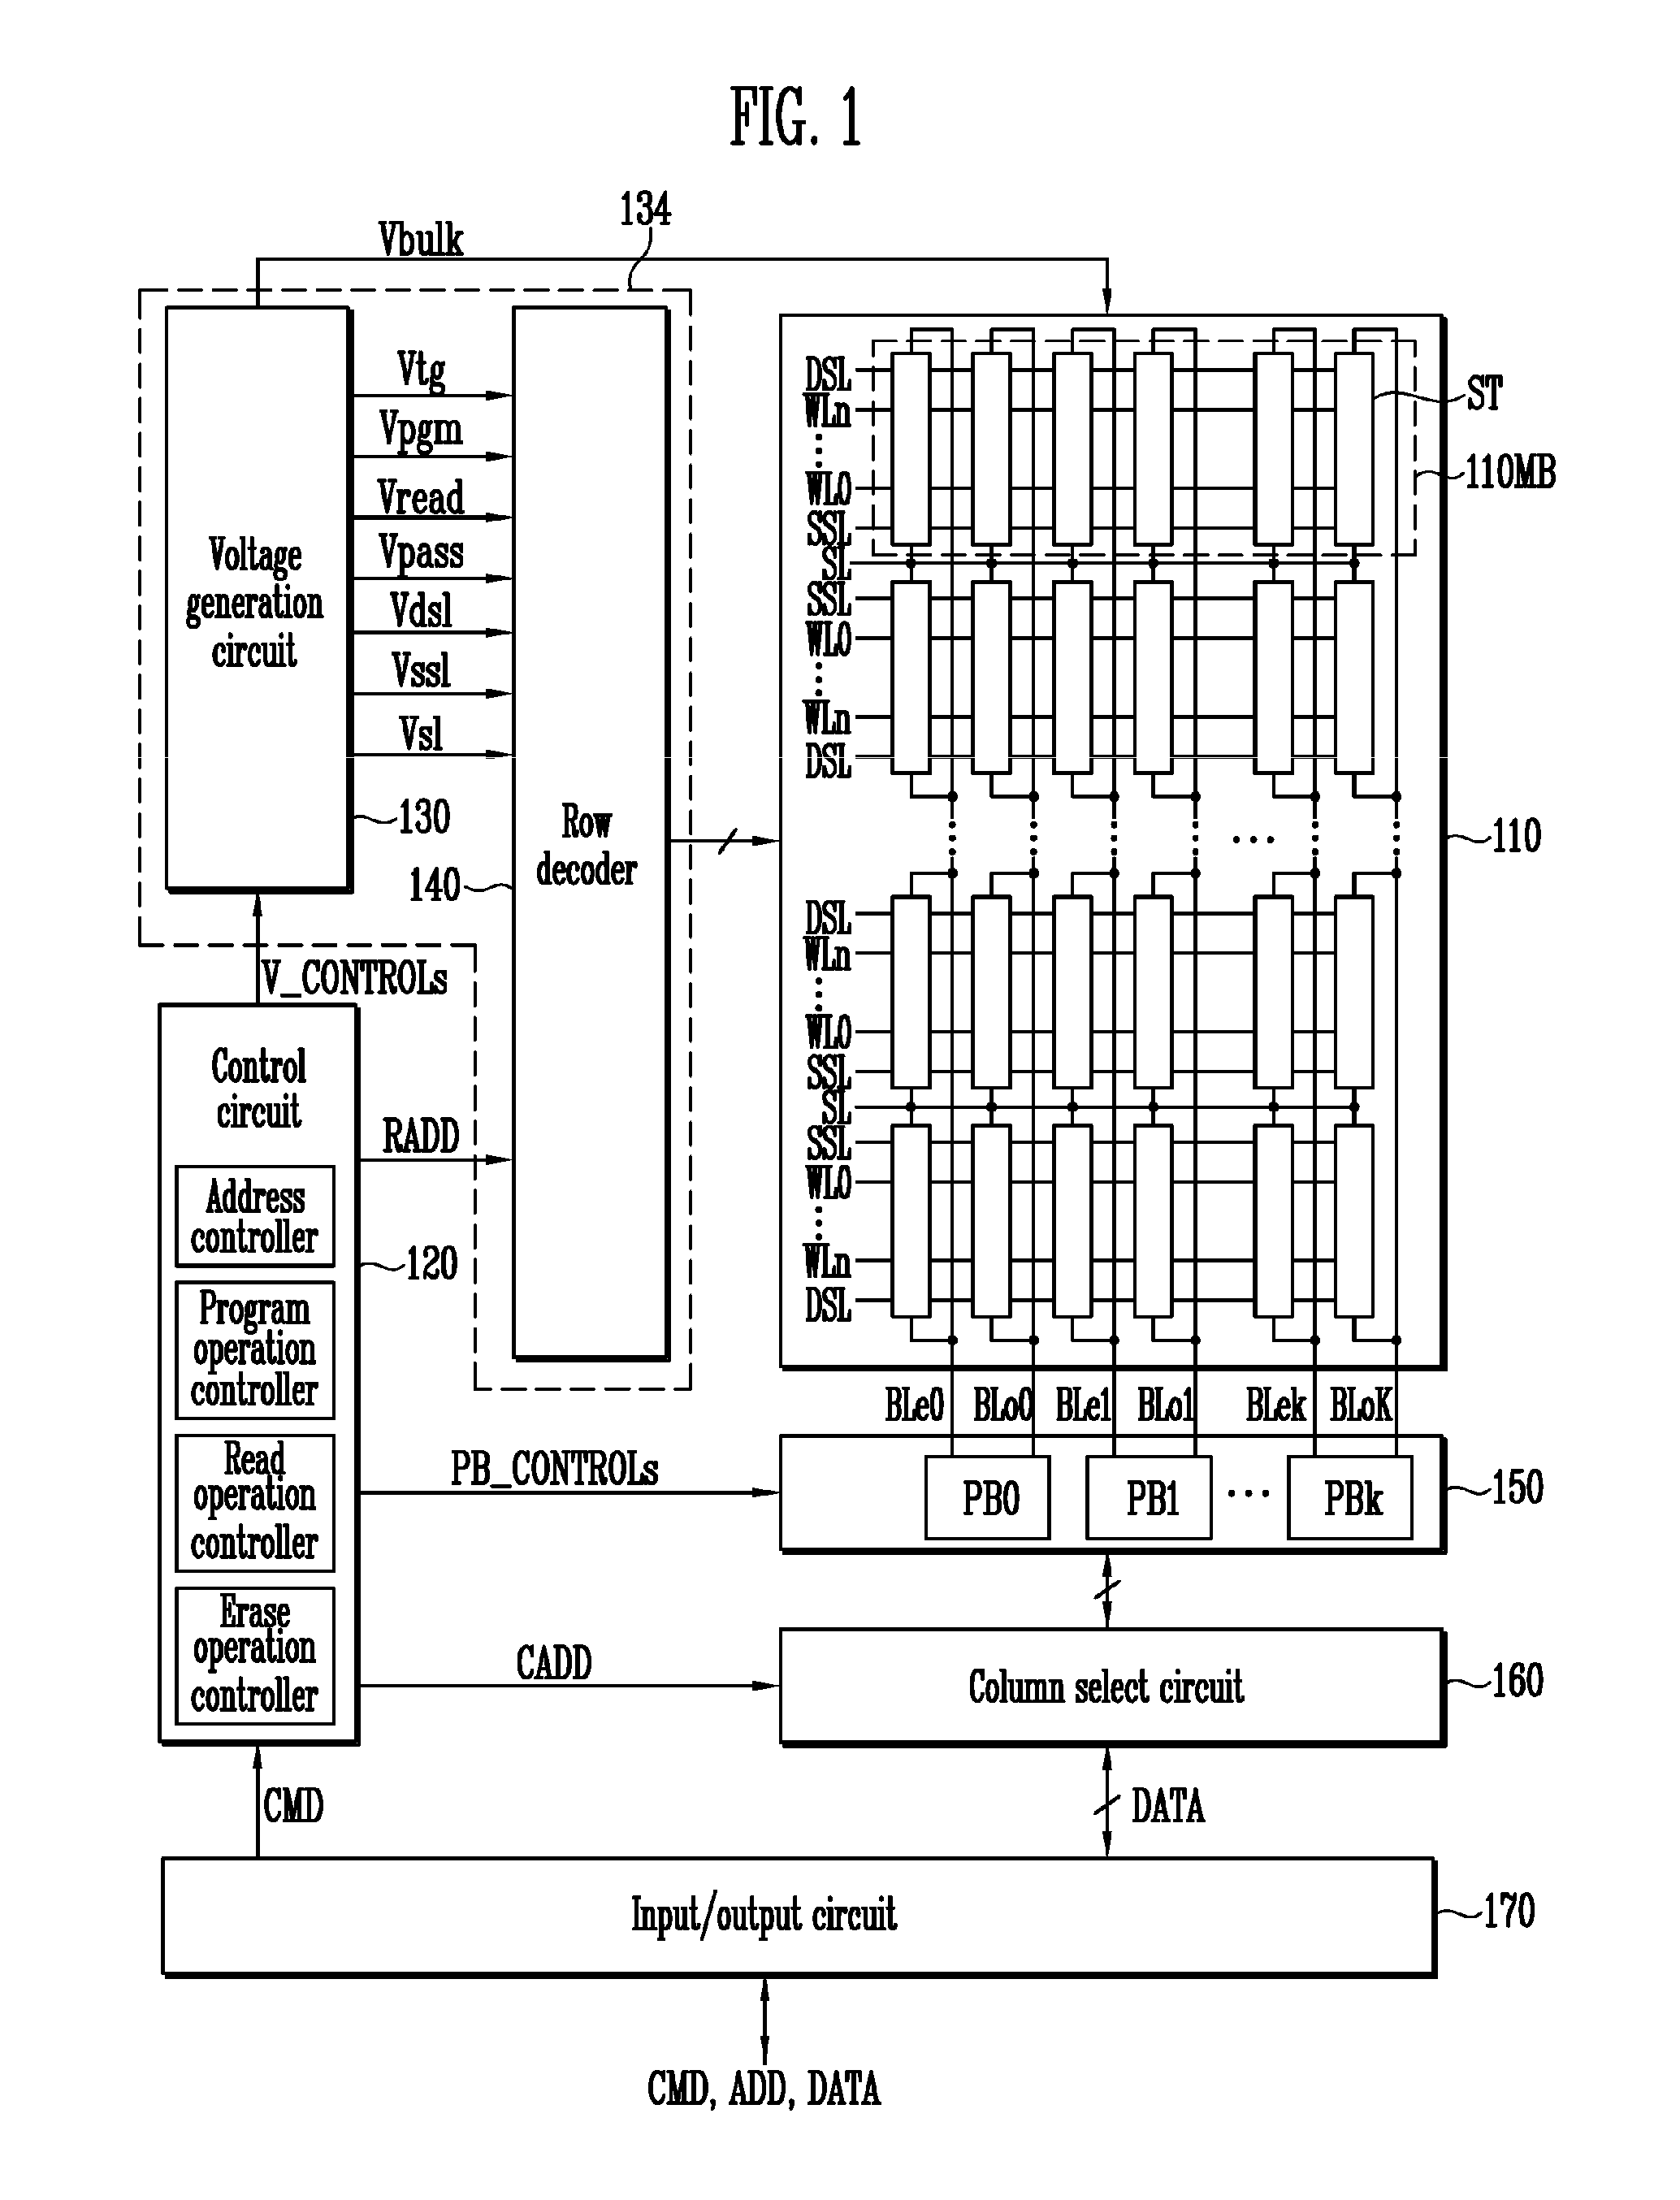 Semiconductor memory device including memory cells and a peripheral circuit and method of operating the same